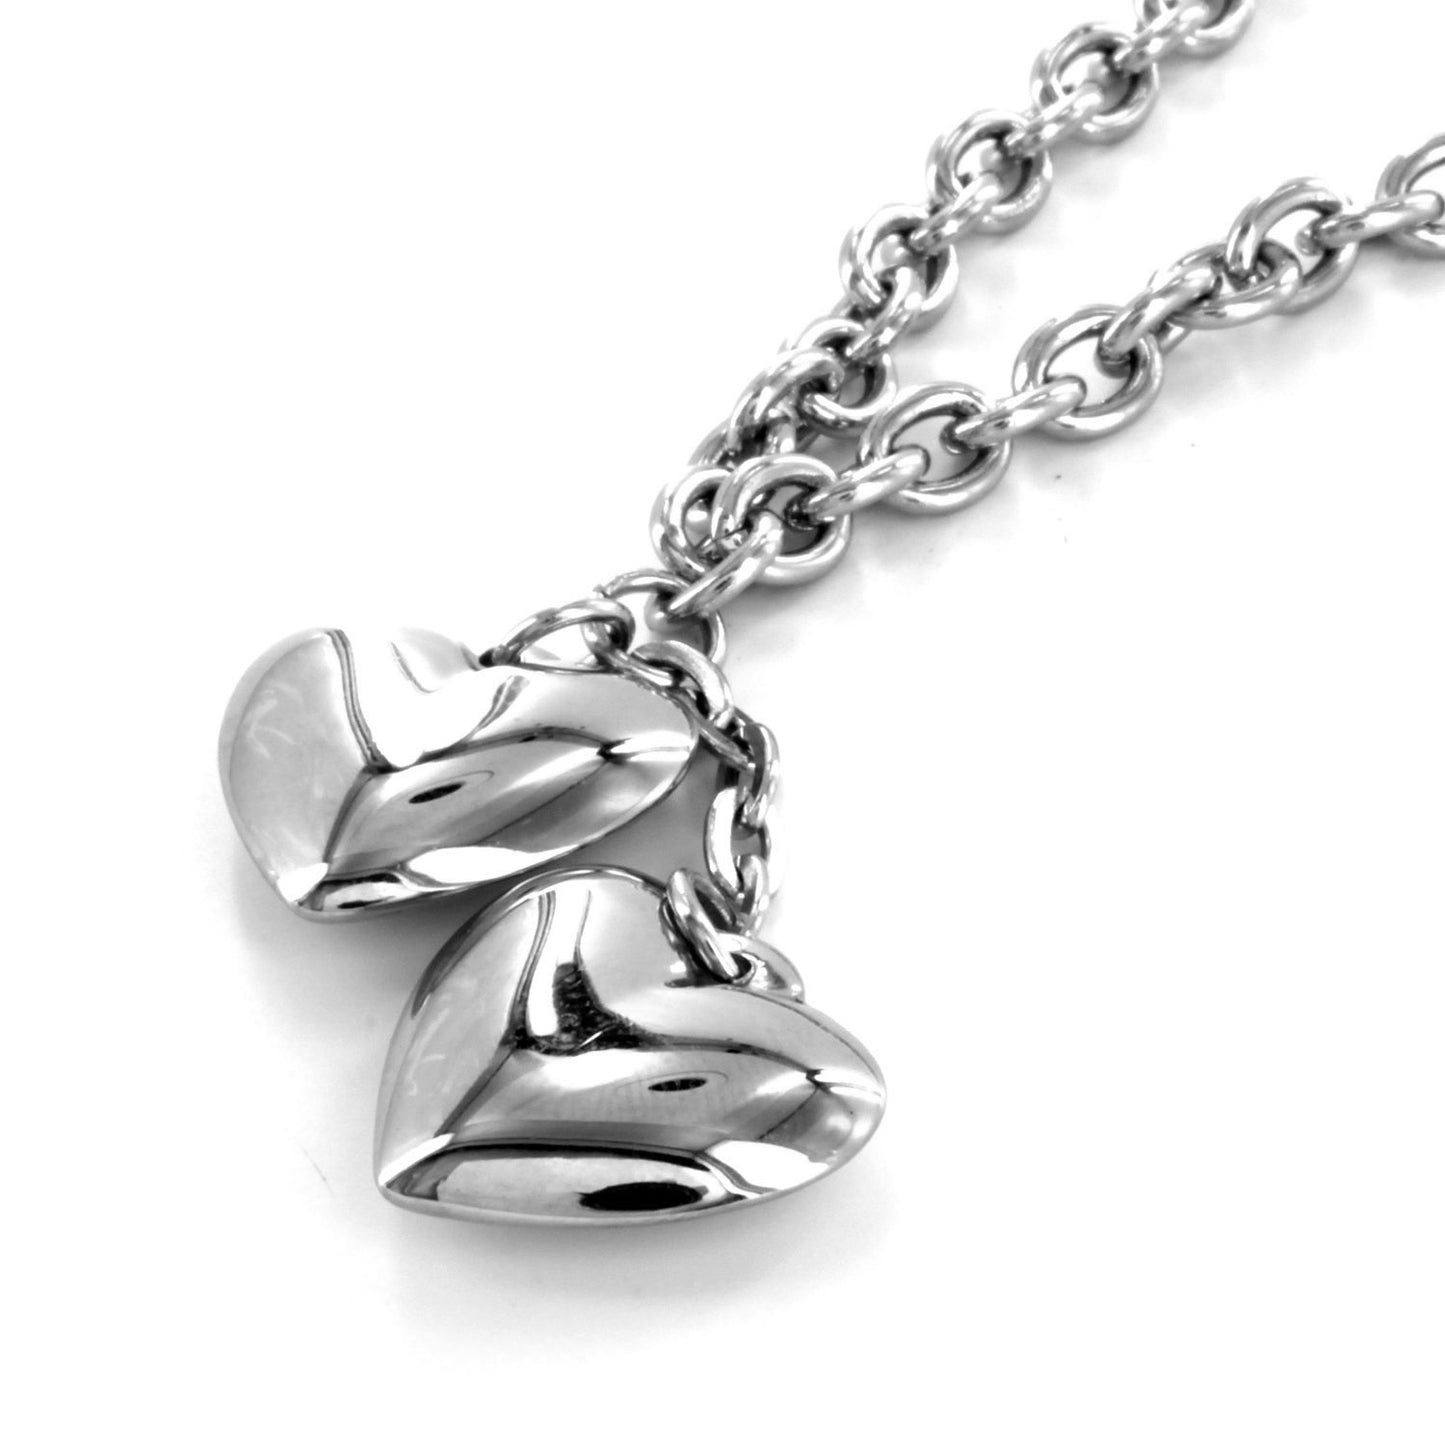 ELYA Women's Polished Dangling Puffed Hearts Stainless Steel Necklace